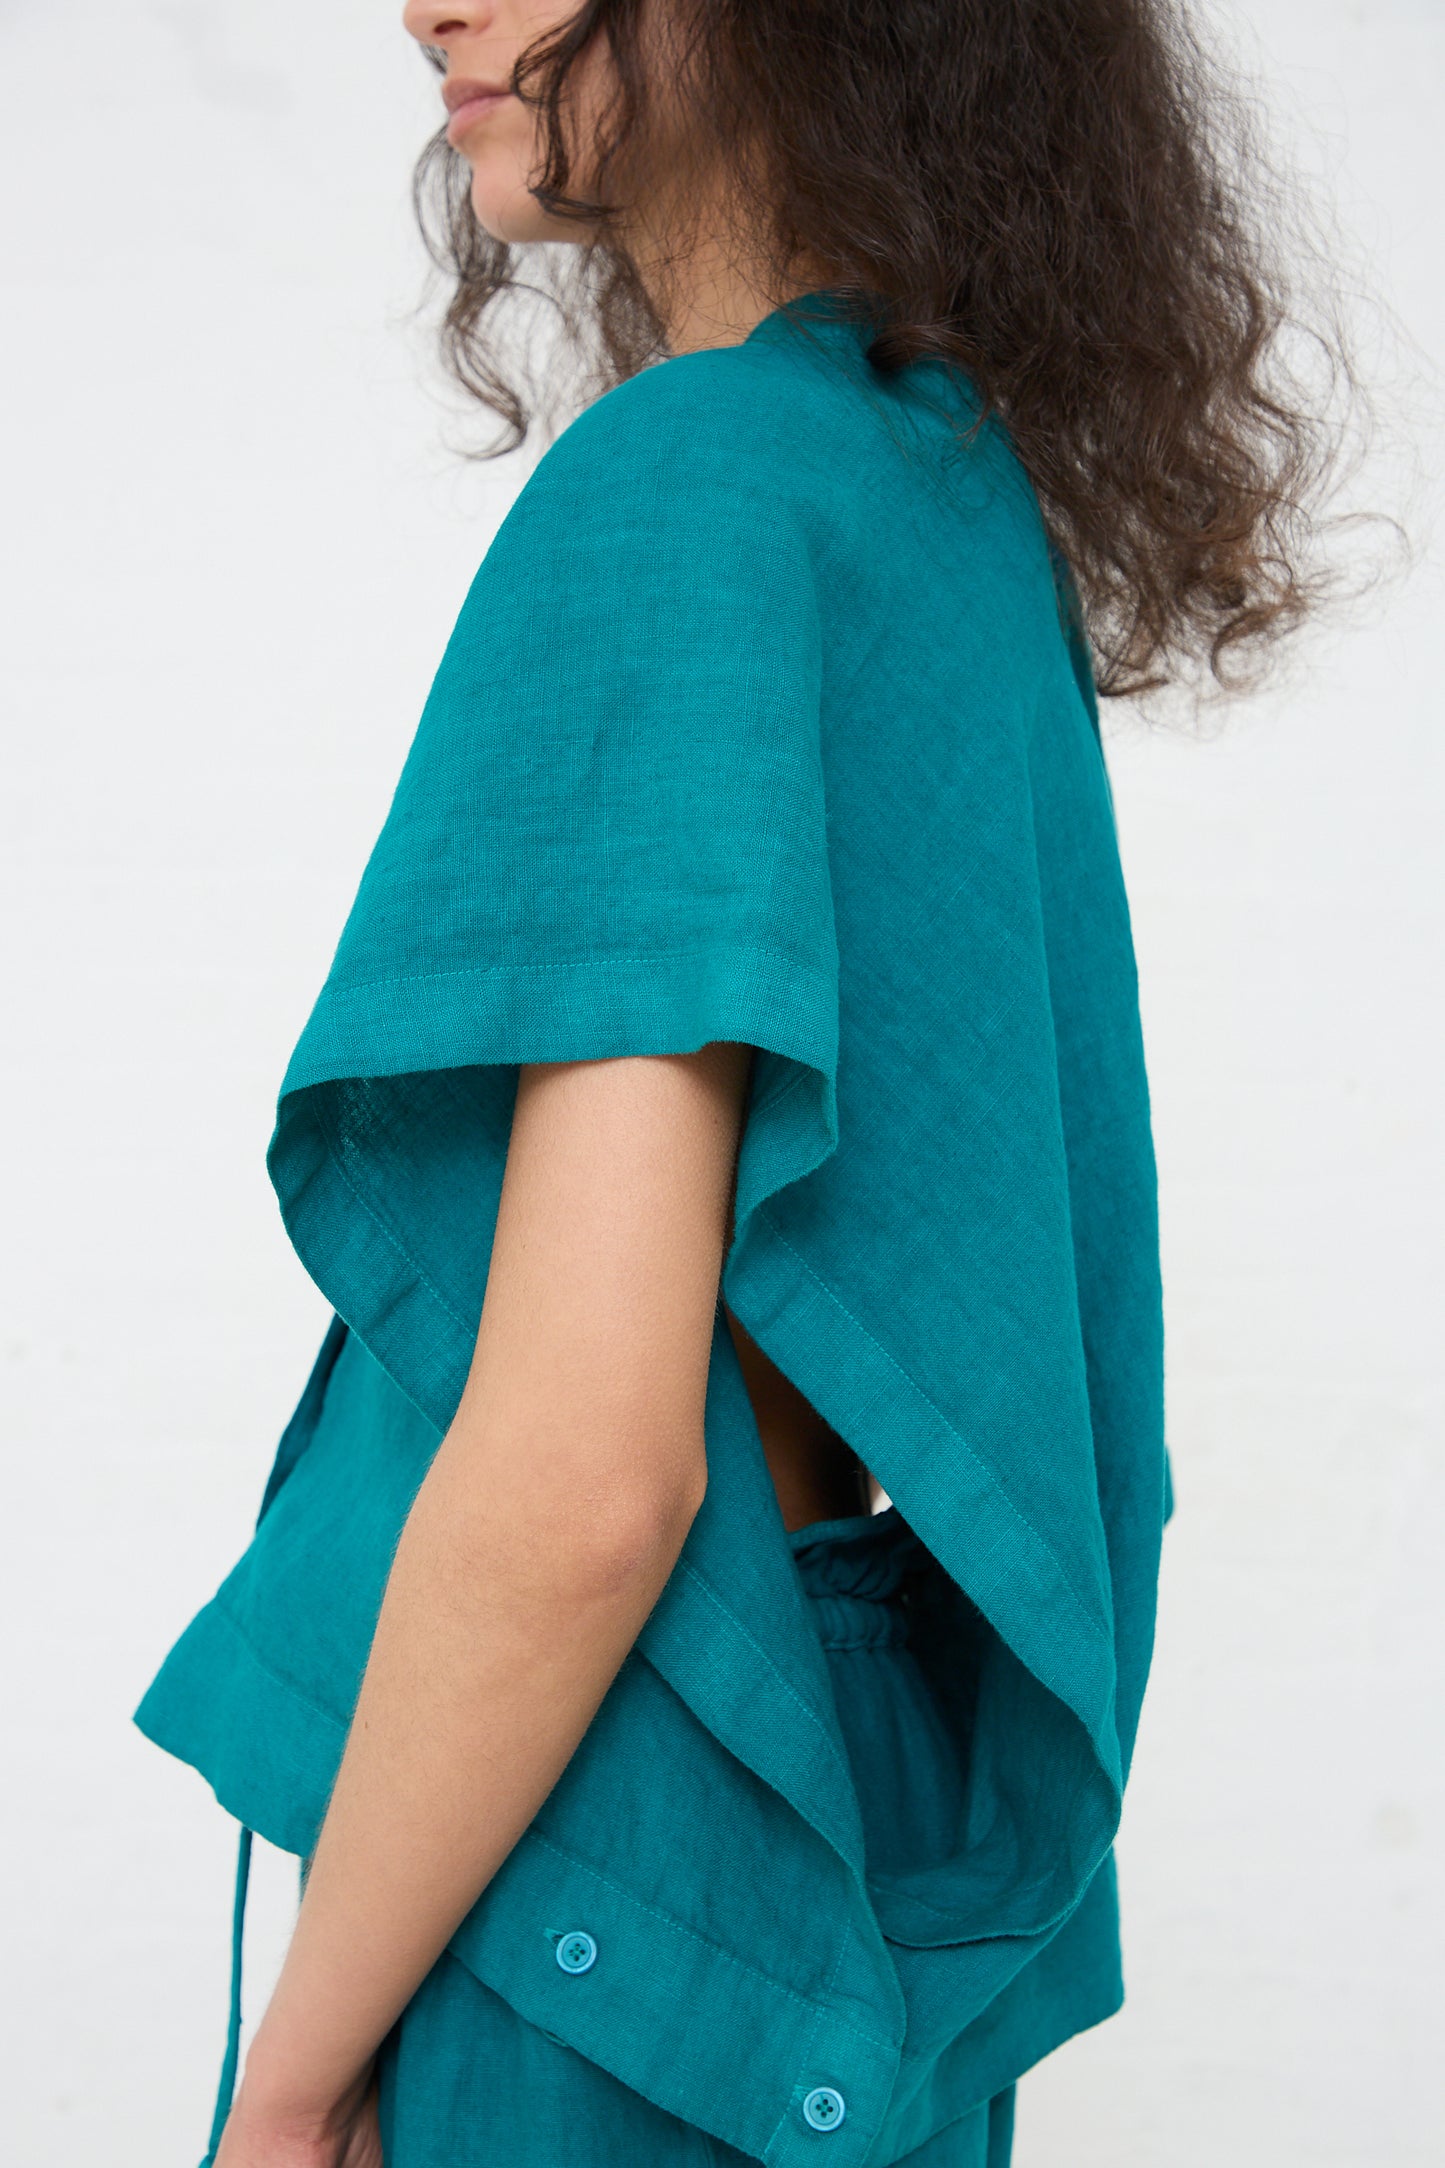 A woman standing in profile, wearing a Linen Origami Top in Peacock by Black Crane, with a boxy fit, the back partly open and button details, against a white background.